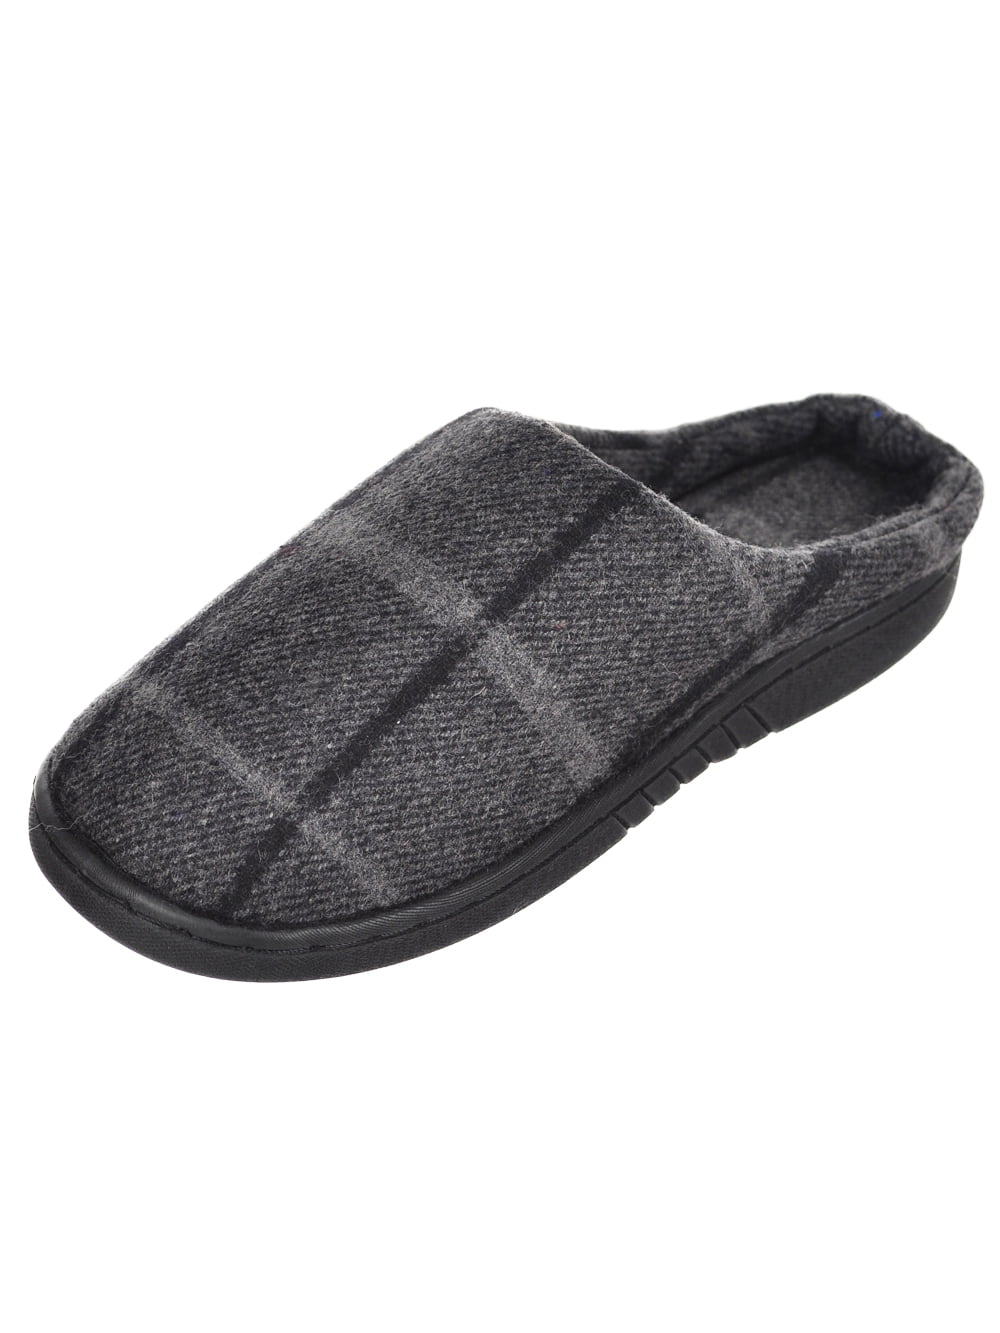 Skysole Kids Boys All Over Plaid Rugged Clog Slippers